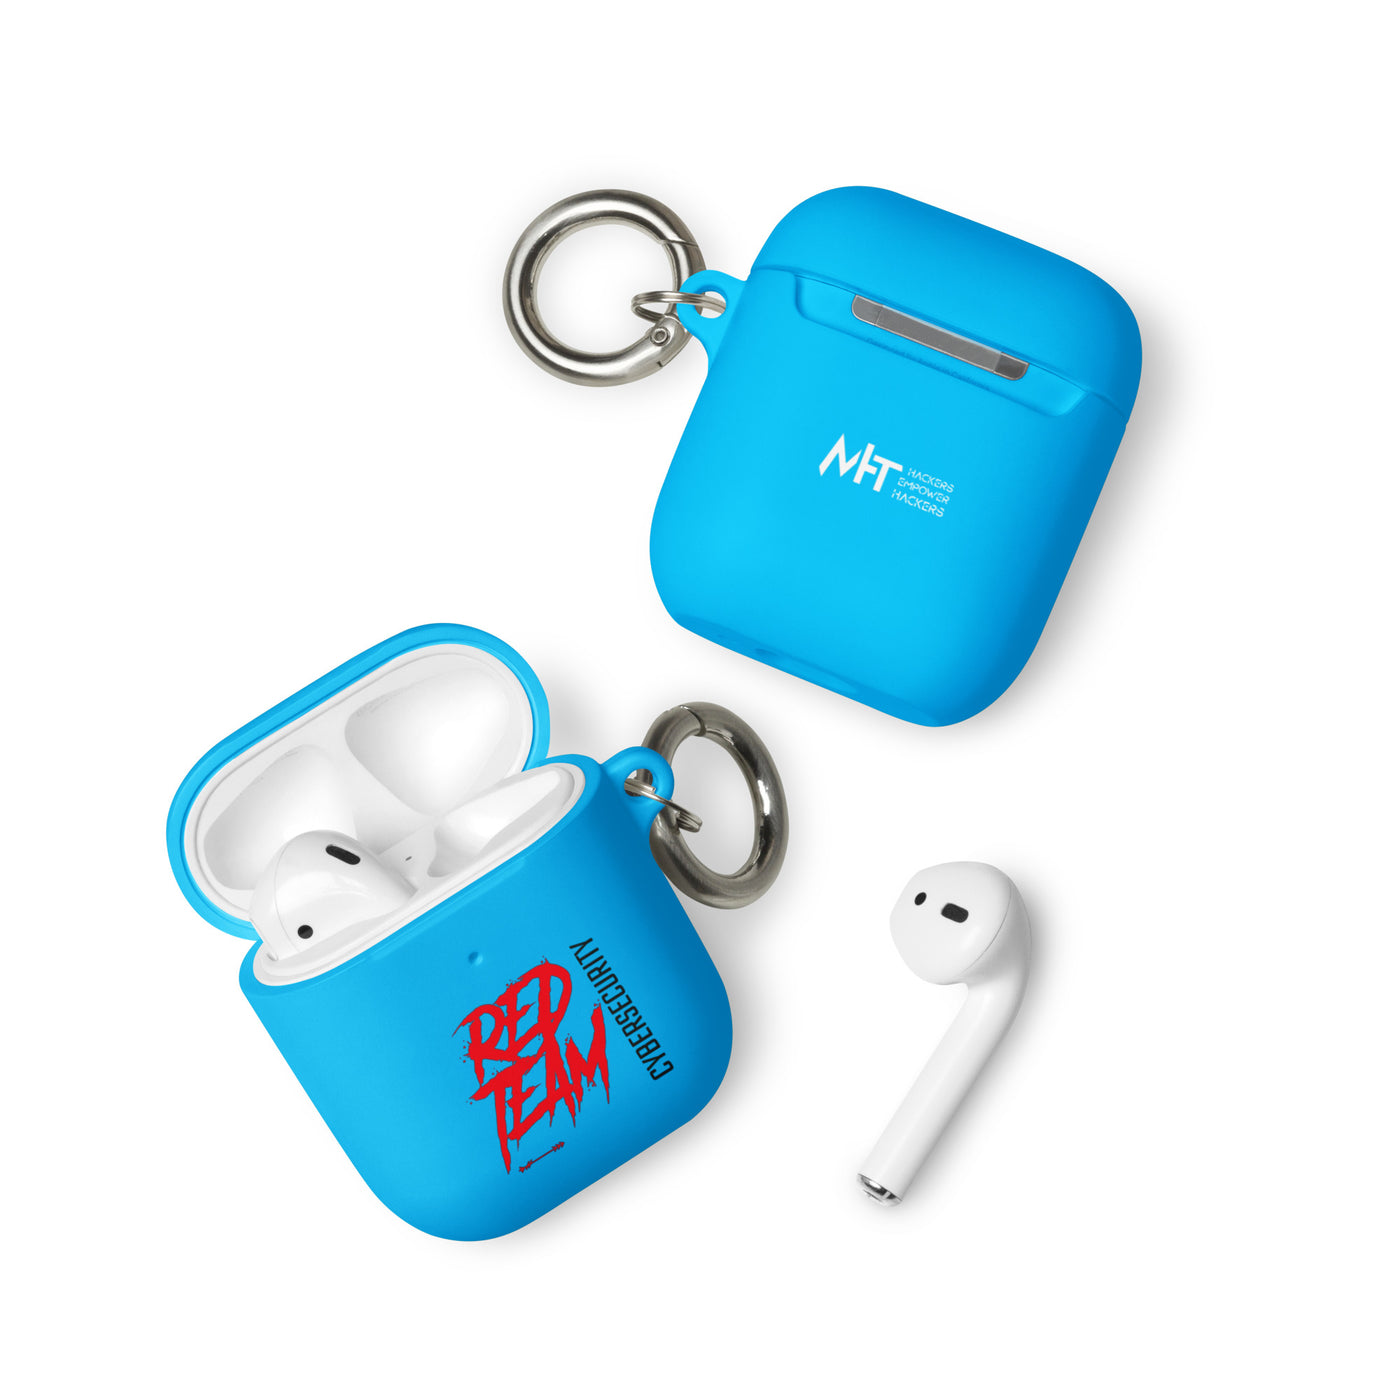 Cyber Security Red Team V10 - AirPods case